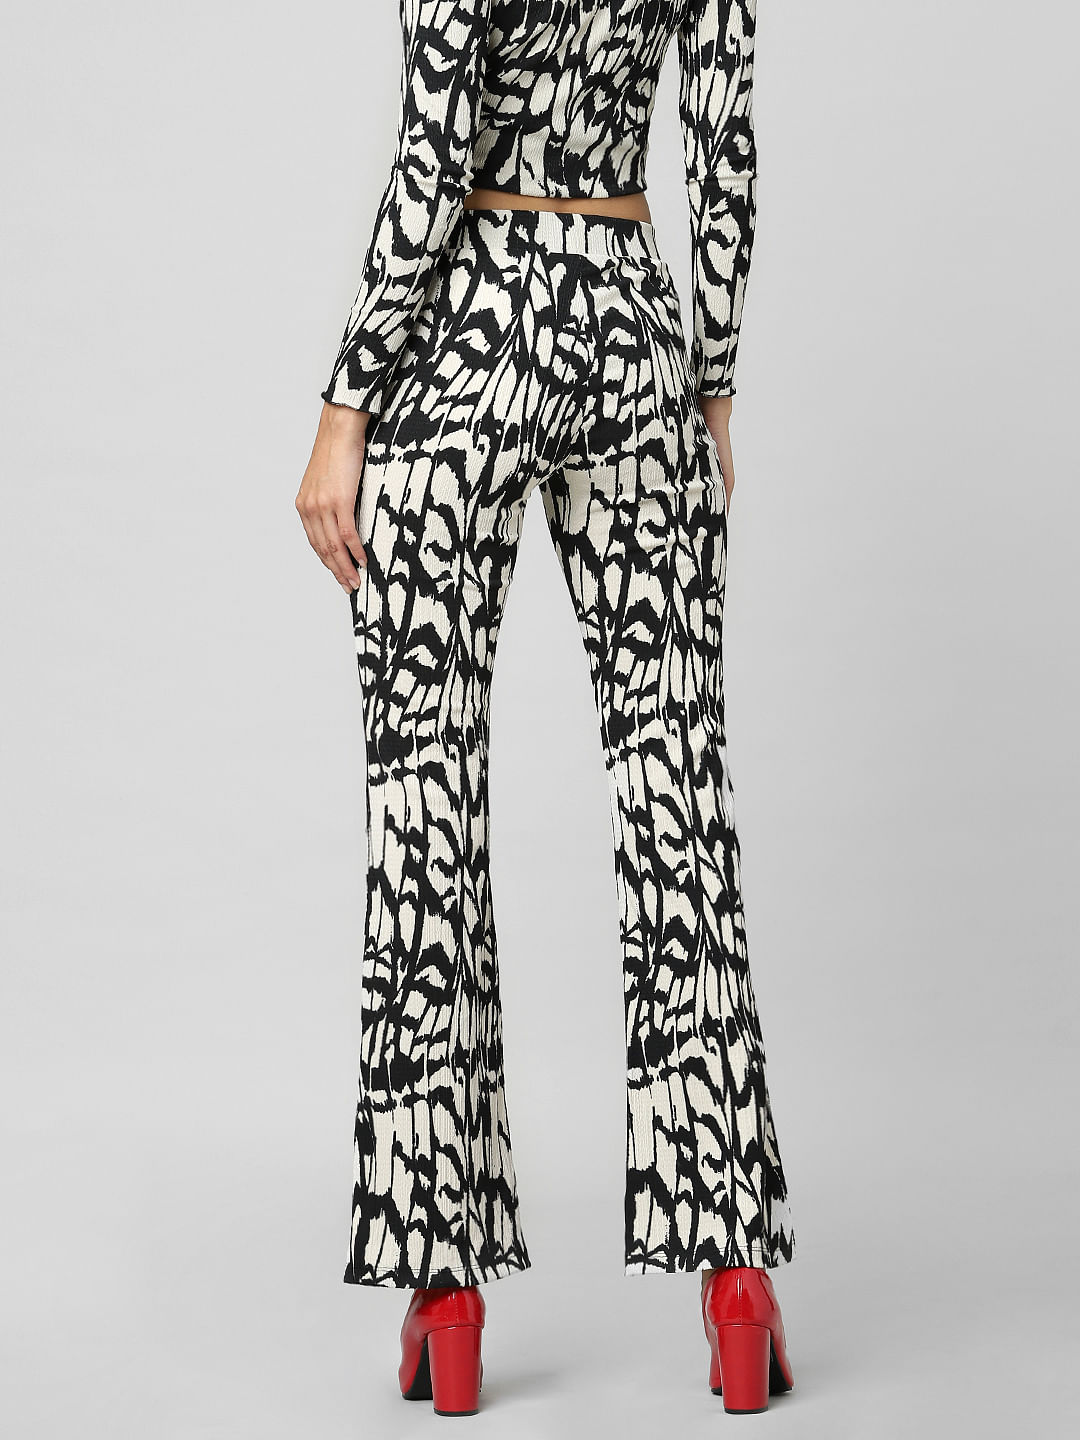 MIXT by Nykaa Fashion Black And White Marble Print Pants Buy MIXT by Nykaa  Fashion Black And White Marble Print Pants Online at Best Price in India   Nykaa